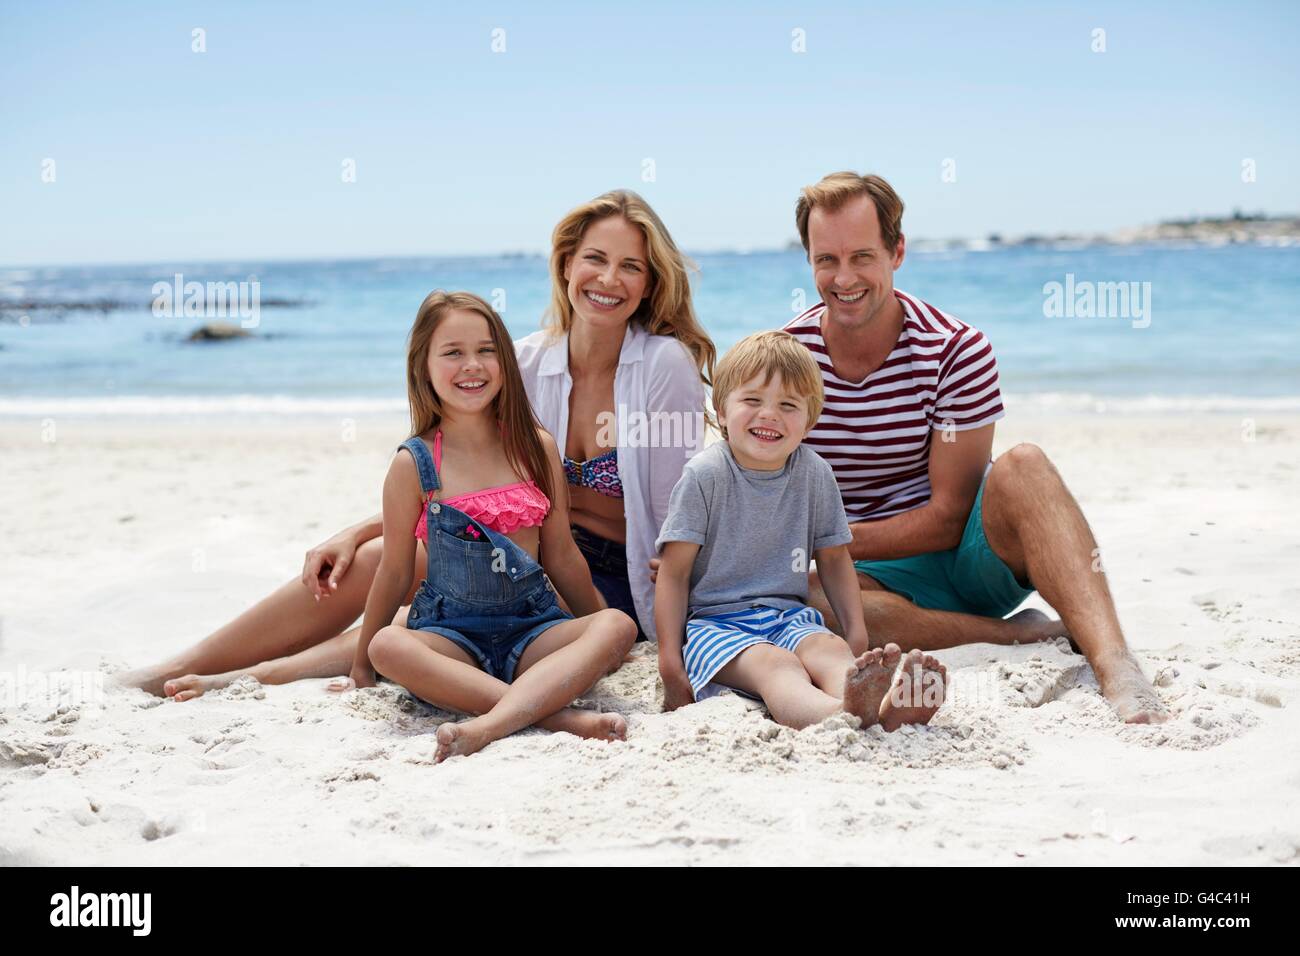 MODEL RELEASED. Family with two children sitting on the beach, portrait. Stock Photo